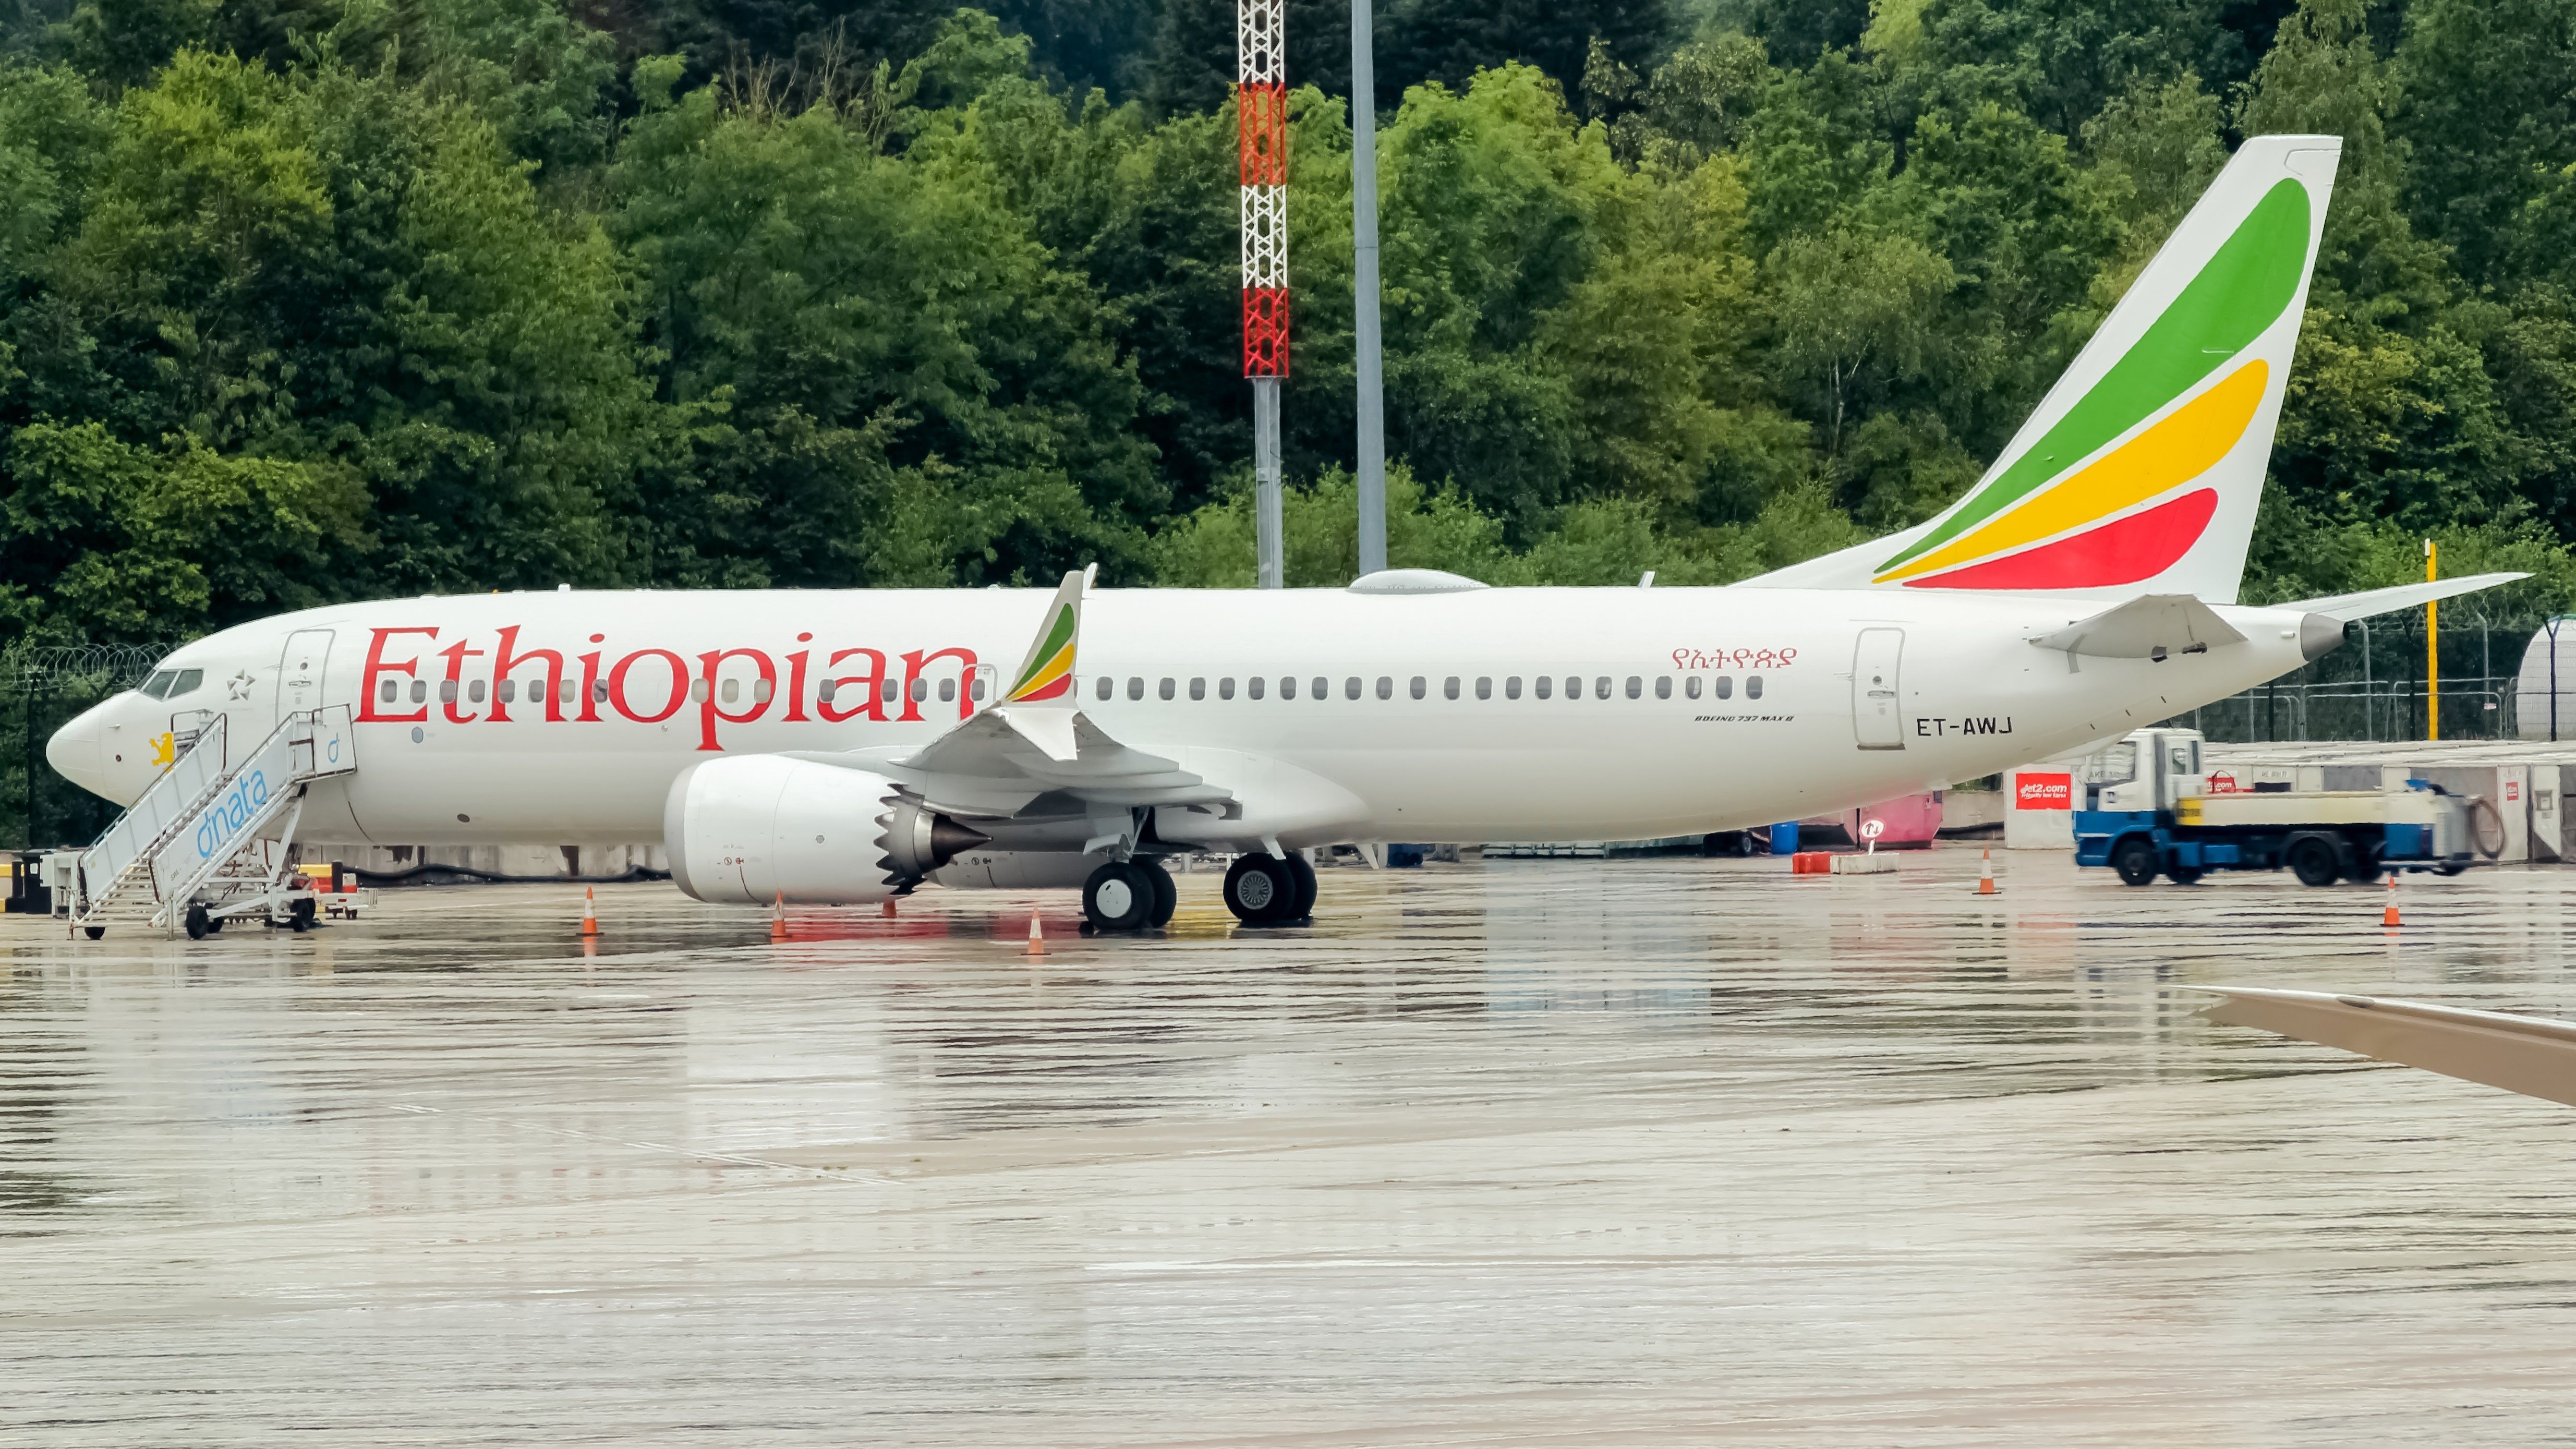 Ethiopian Airlines 737 MAX 8 on stand